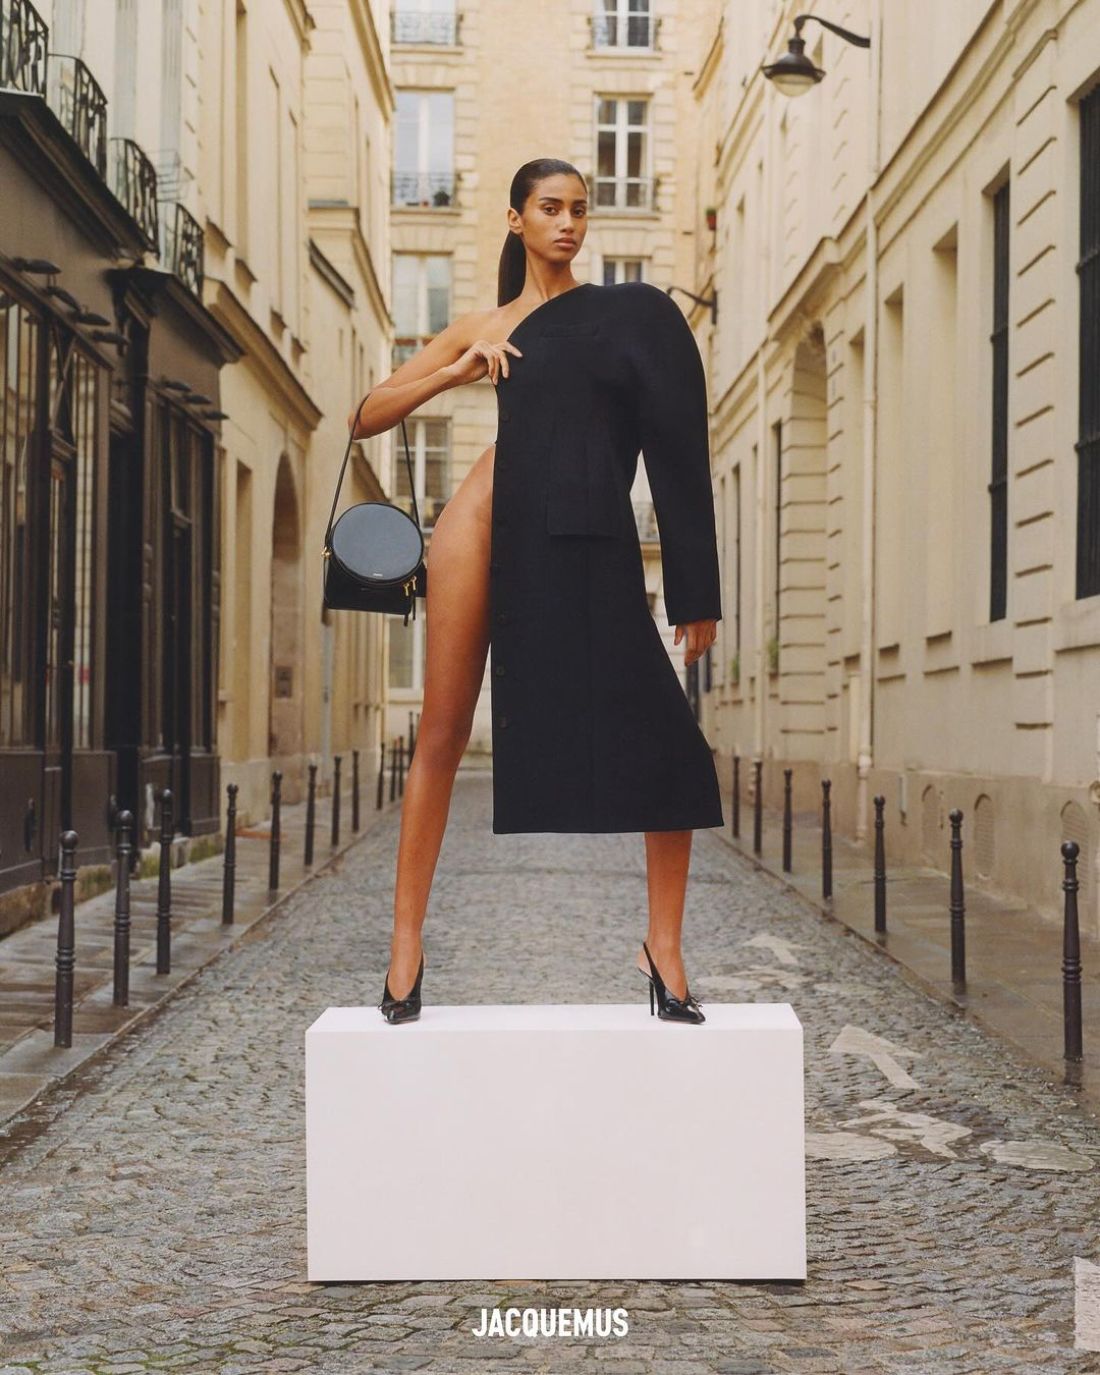 Imaan Hammam by Theo De Gueltzl & Katie Burnett for Jacquemus Les Sculptures Spring-Summer 2024 Fashion Campaign